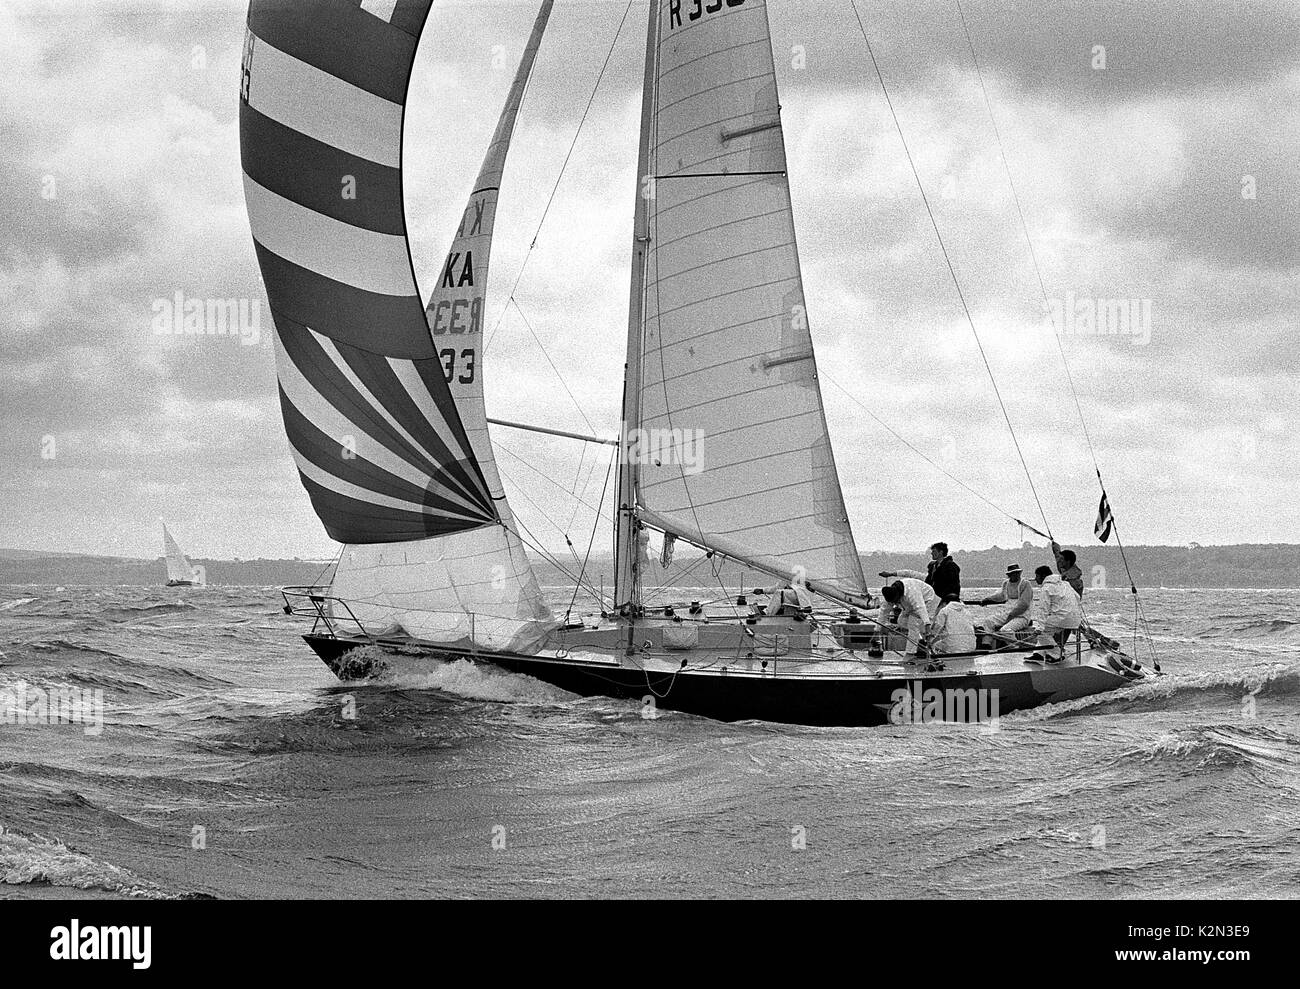 AJAXNETPHOTO. 1979. SOLENT, ENGLAND. - ADMIRAL'S CUP SOLENT INSHORE RACE - POLICE CAR - AUSTRALIA, SKIPPERED BY PETER CANTWELL. PHOTO:JONATHAN EASTLAND/AJAX REF:79 2004 Stock Photo